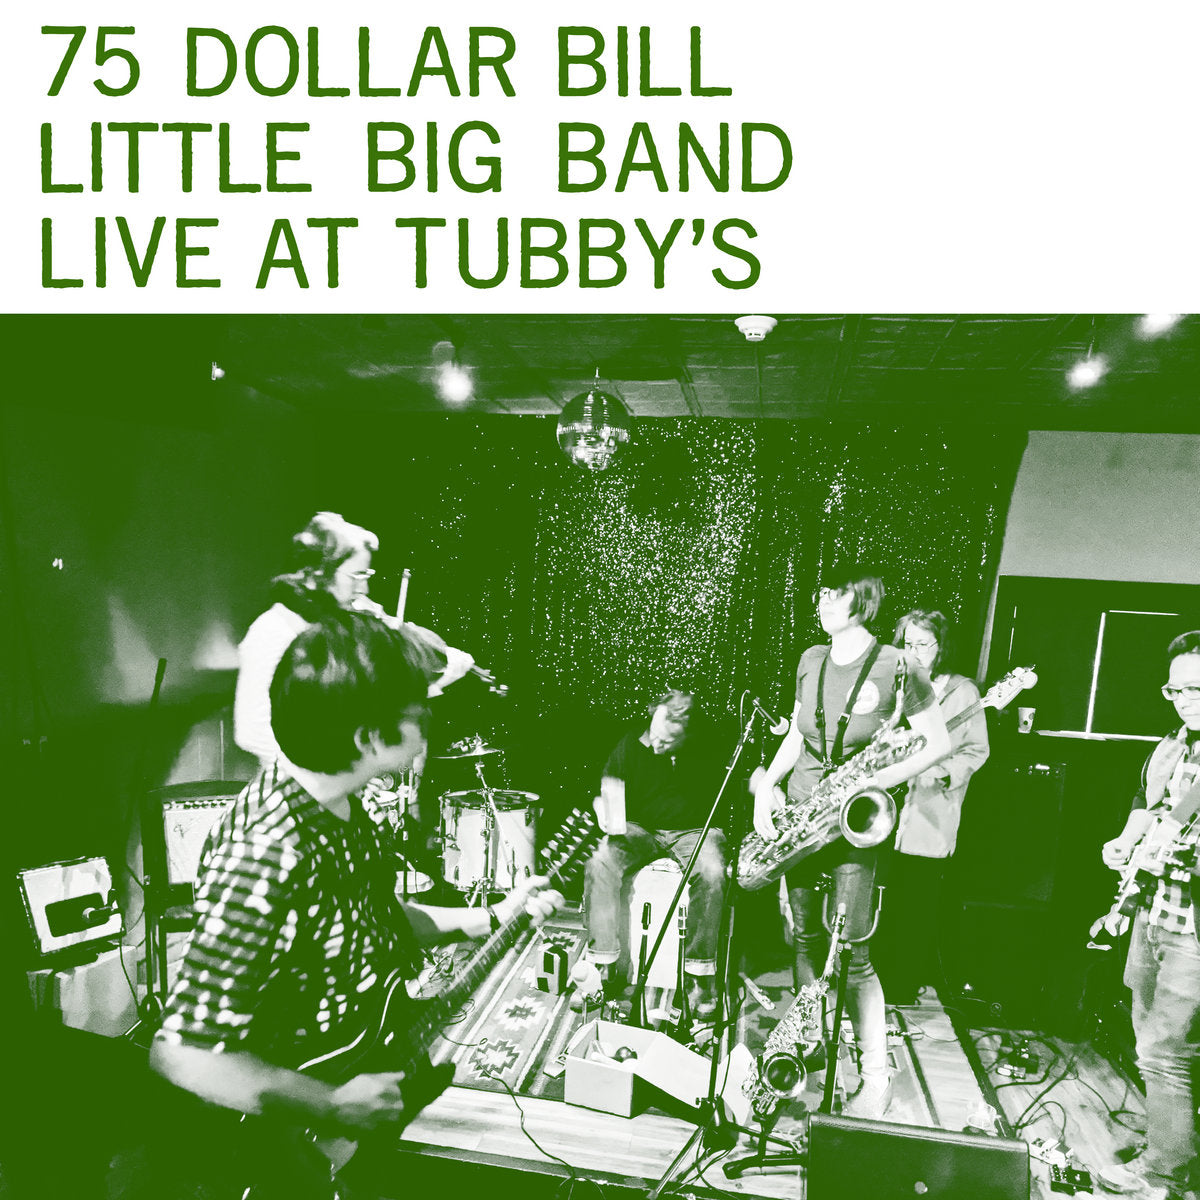 Arcade Sound - 75 Dollar Bill Little Big Band - Live at Tubby's front cover